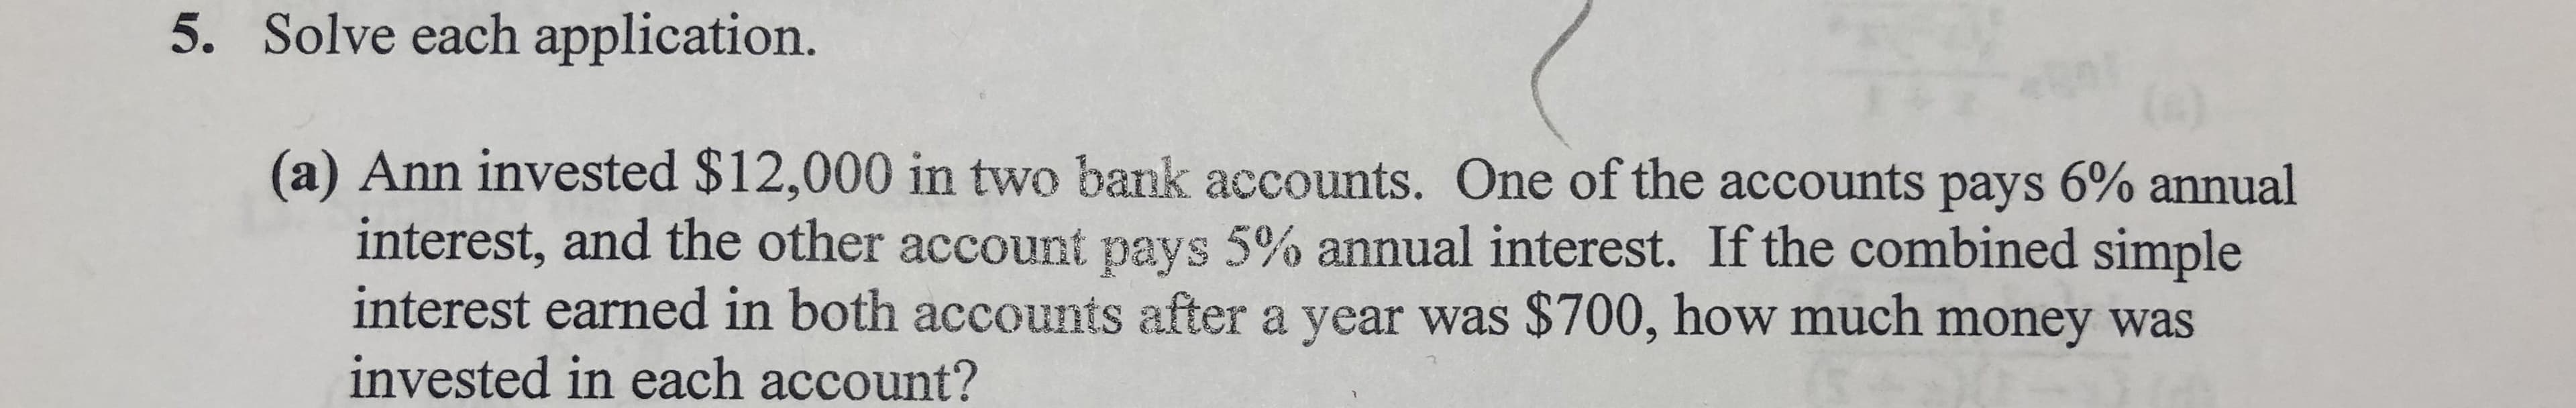 5. Solve each application.
(a) Ann invested $12,000 in two bank accounts. One of the accounts pays 6% annual
interest, and the other account pays 5% annual interest. If the combined simple
interest earned in both accounts after a year was $700, how much money was
invested in each account?
